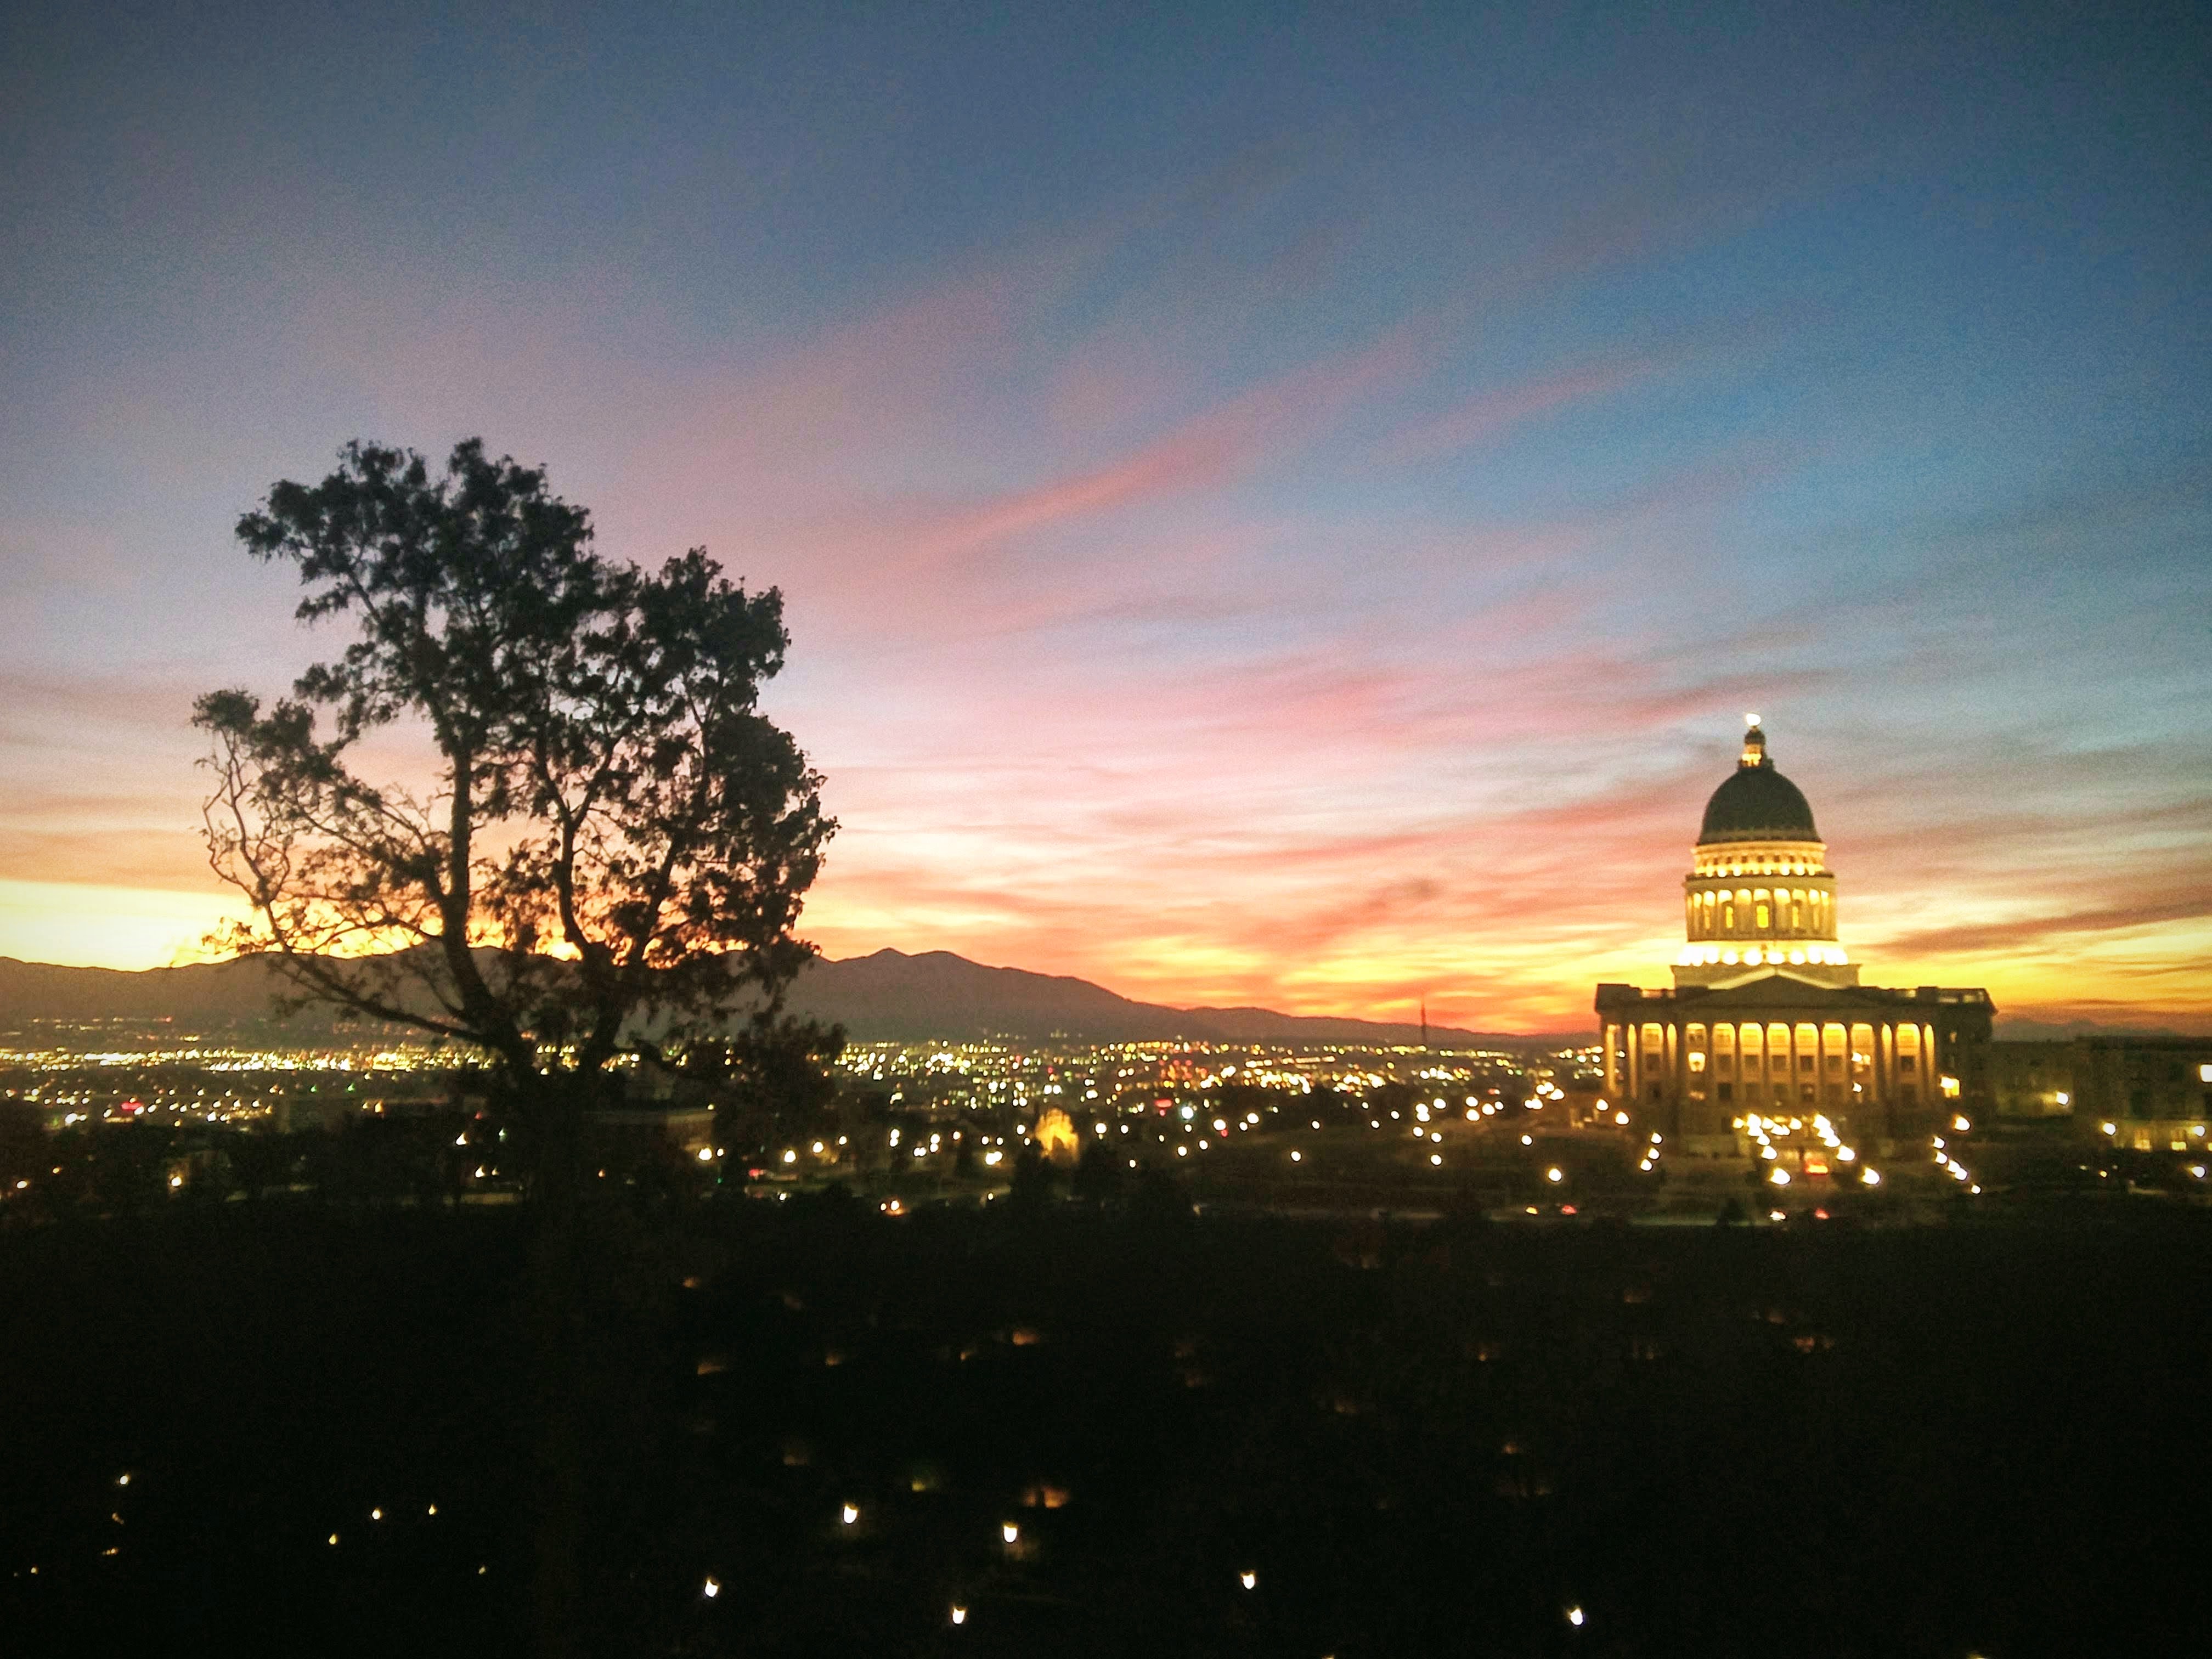 Sunset over the Utah state capitol building.